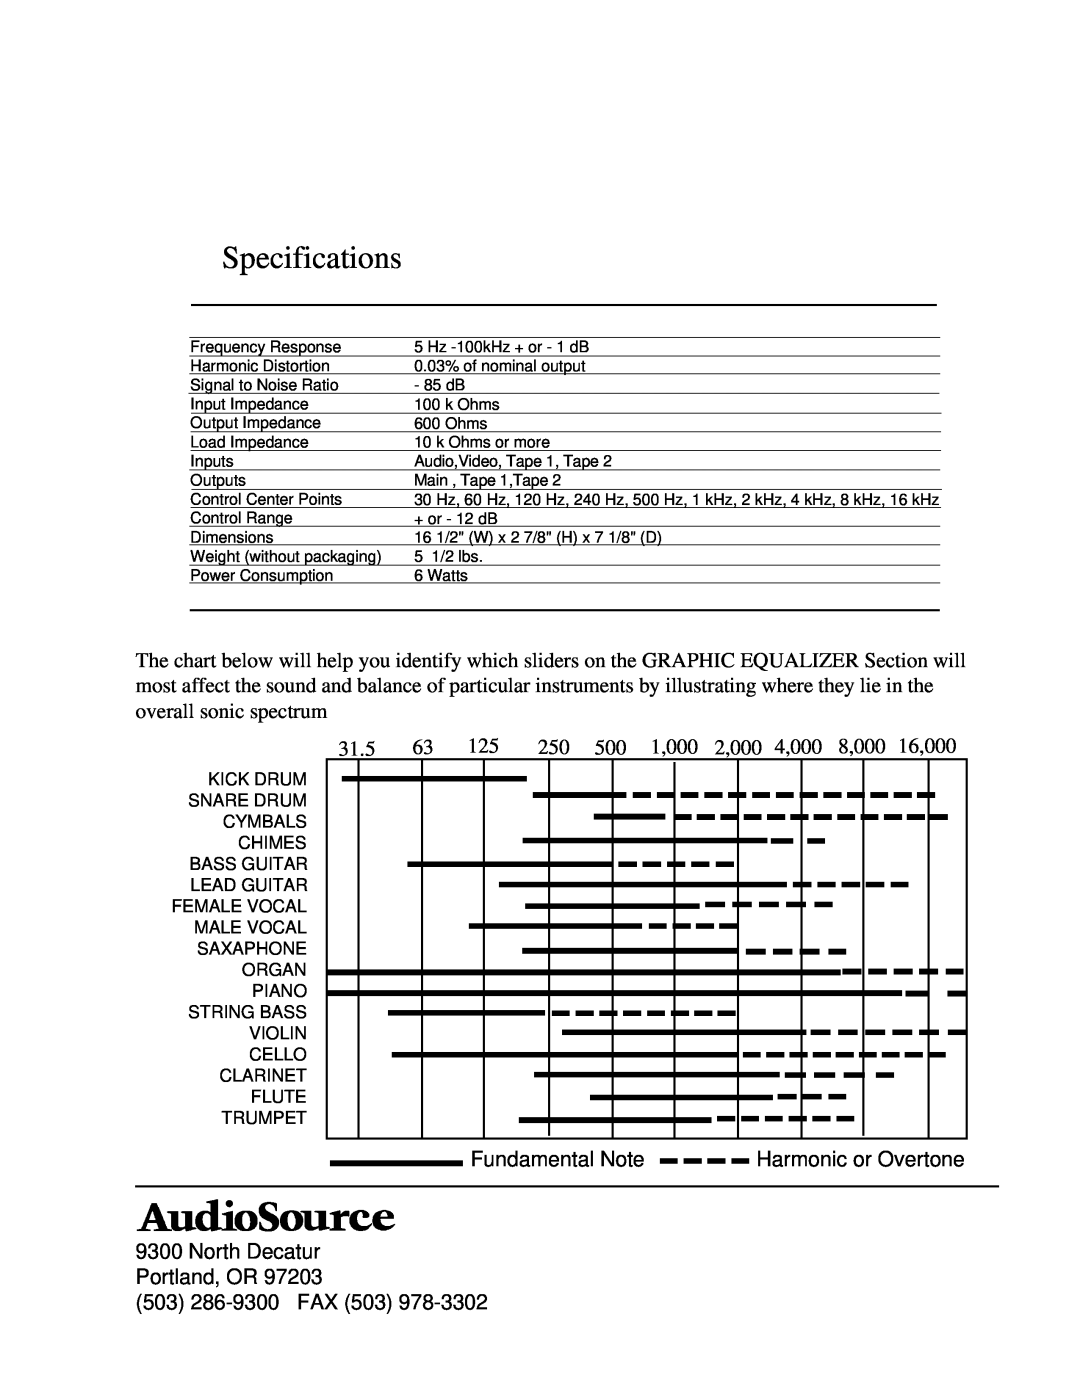 AudioSource EQ Eleven, Ten-Band Streo Graphic Equalizer with Spectrum Analyzer Display owner manual Specifications 